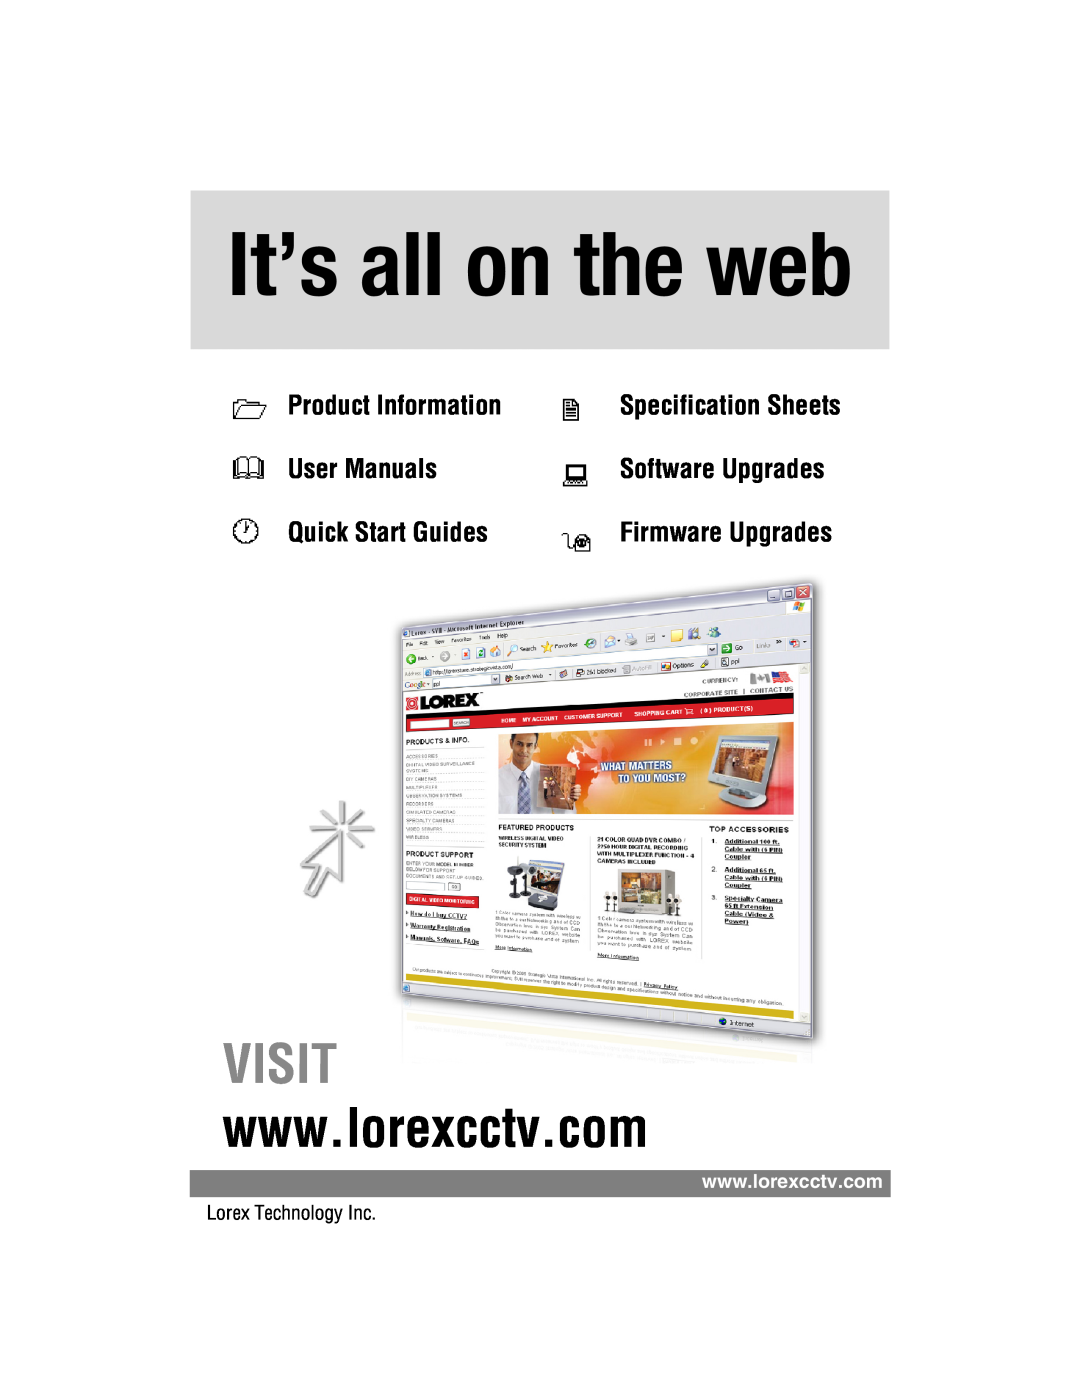 LOREX Technology L208, L204 Software Upgrades, Lorex Technology Inc, It’s all on the web, Visit, Product Information 